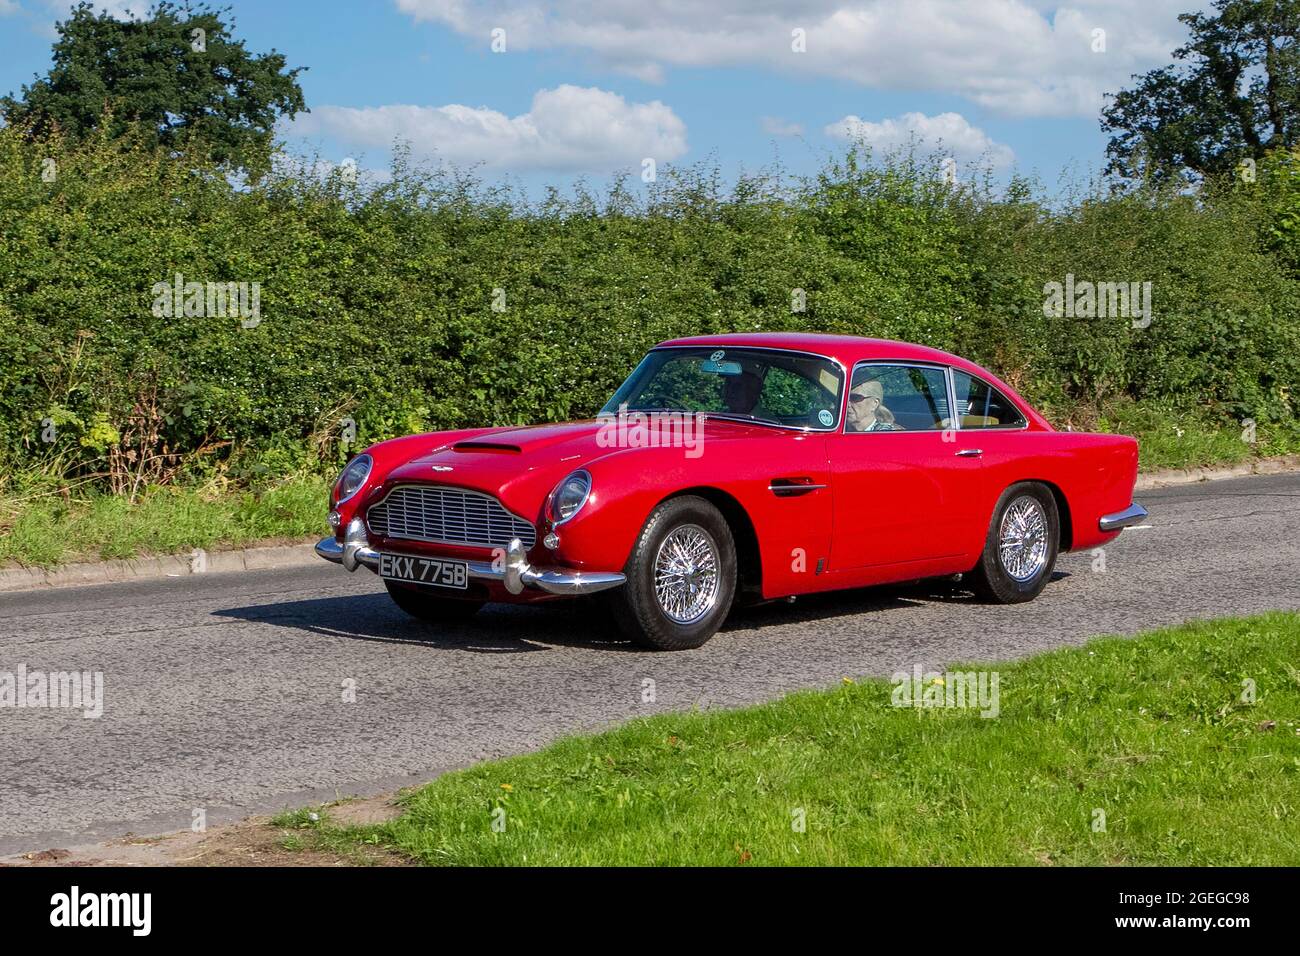 A front view of a 1960s 60s Red Aston Martin Db5 Coupe Petrol vintage classic car retro driver vehicle automobile Stock Photo